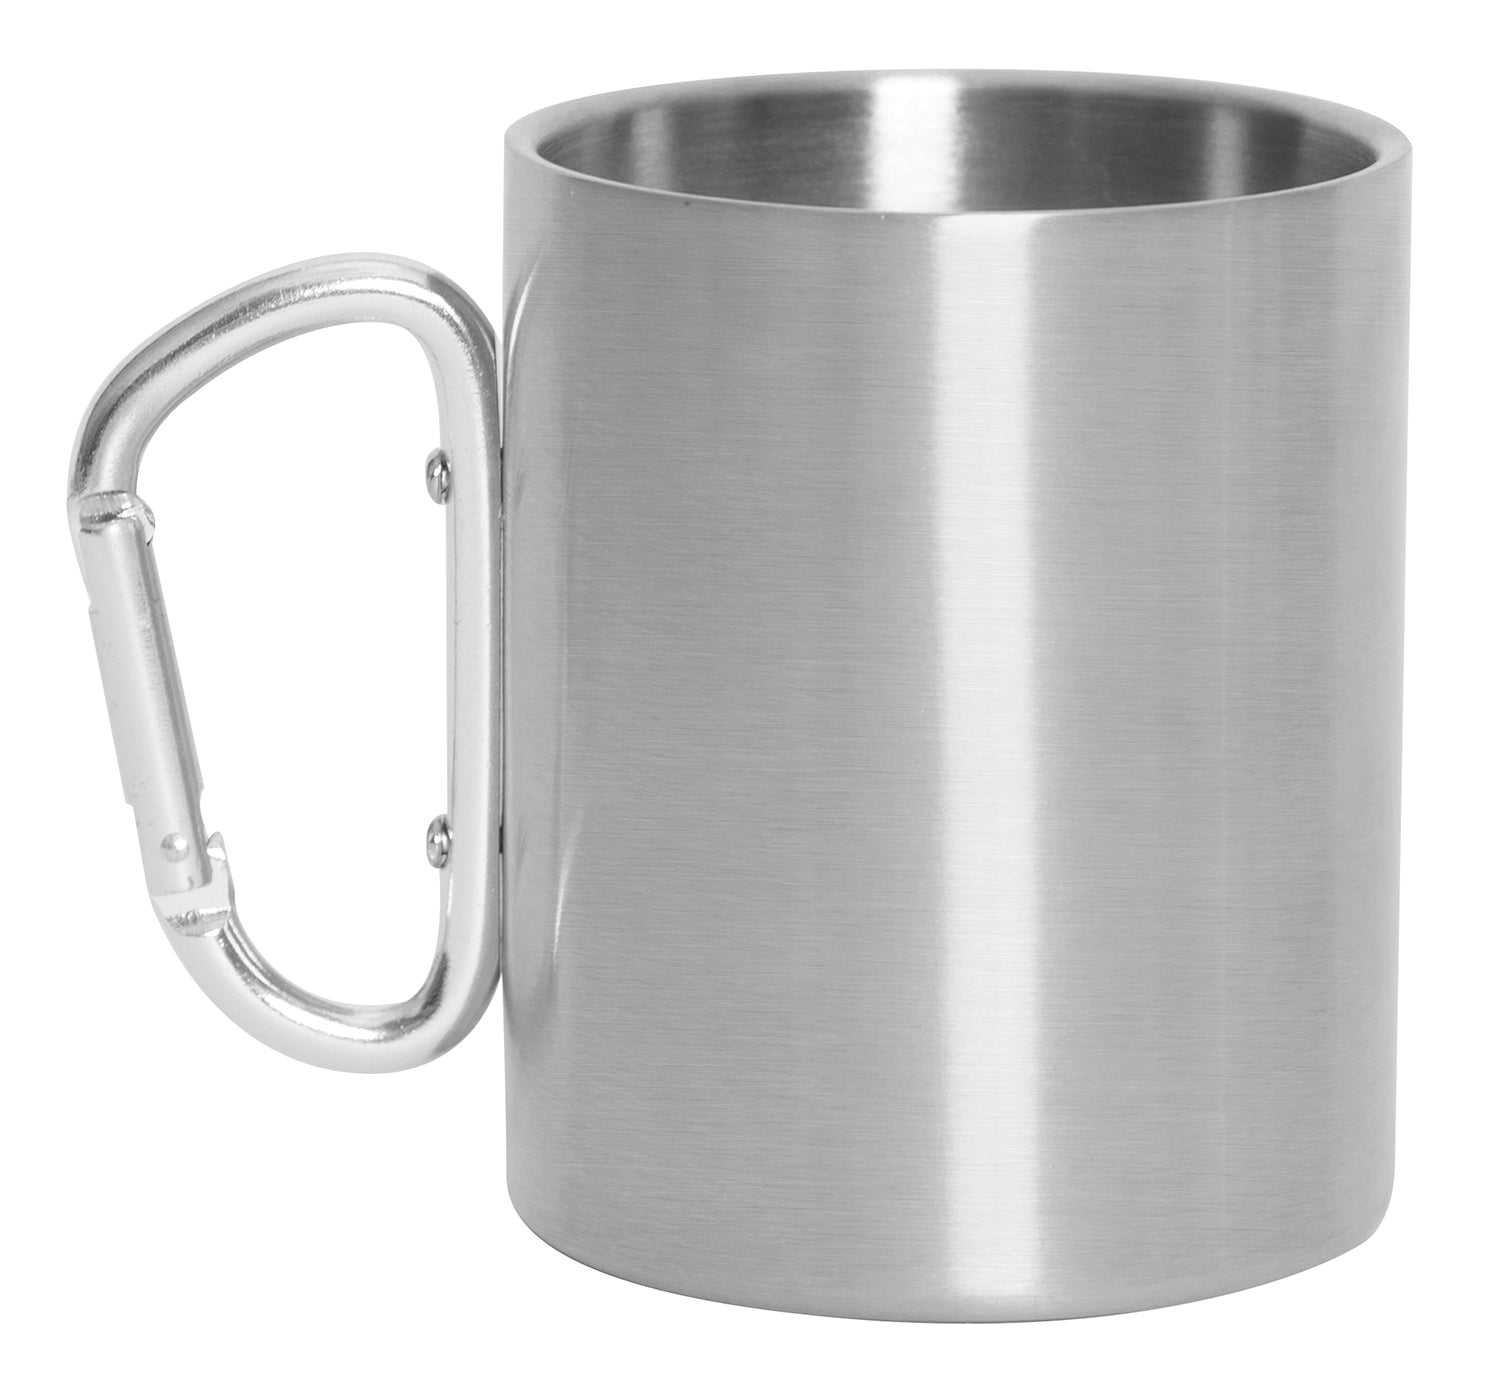 Milspec Insulated Stainless Steel Portable Camping Mug With Carabiner Handle – 15 oz Camping & Survival Gear MilTac Tactical Military Outdoor Gear Australia